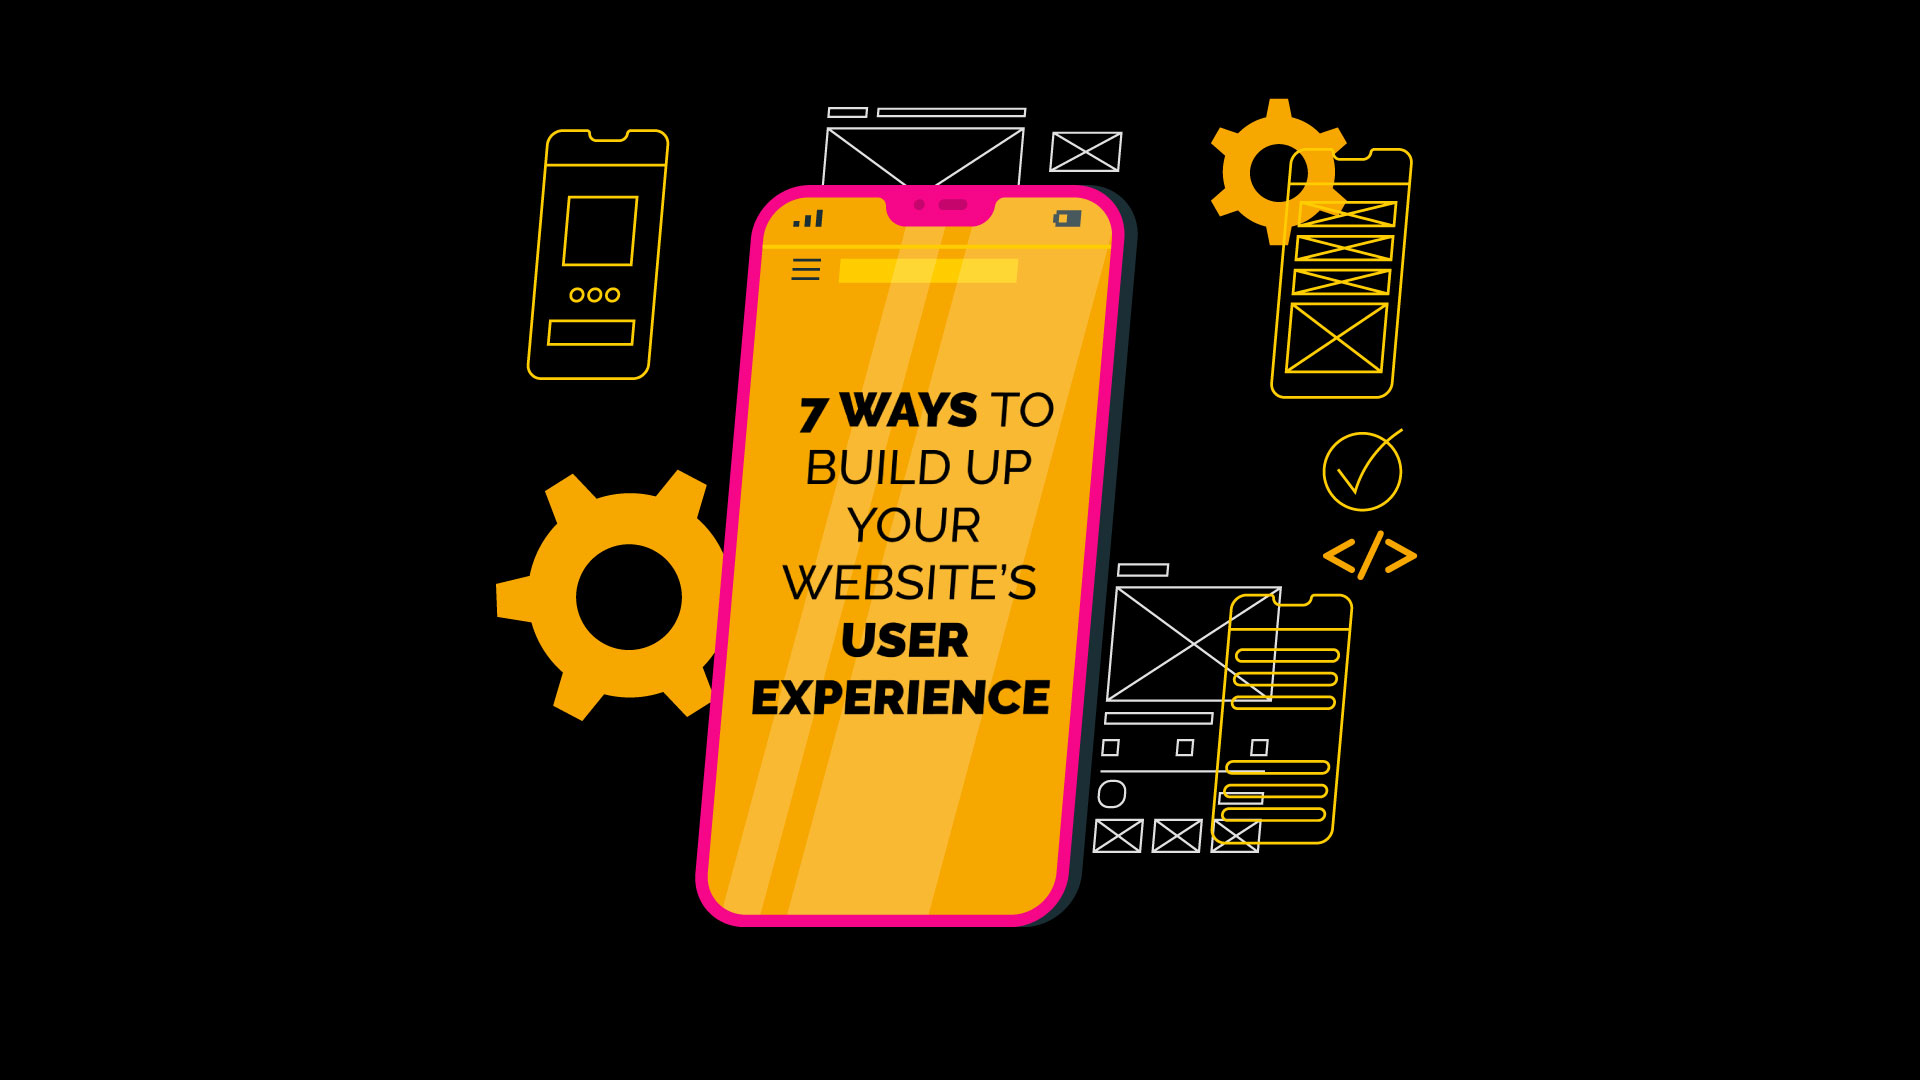 7 Ways To Build Up Your Website’s User Experience